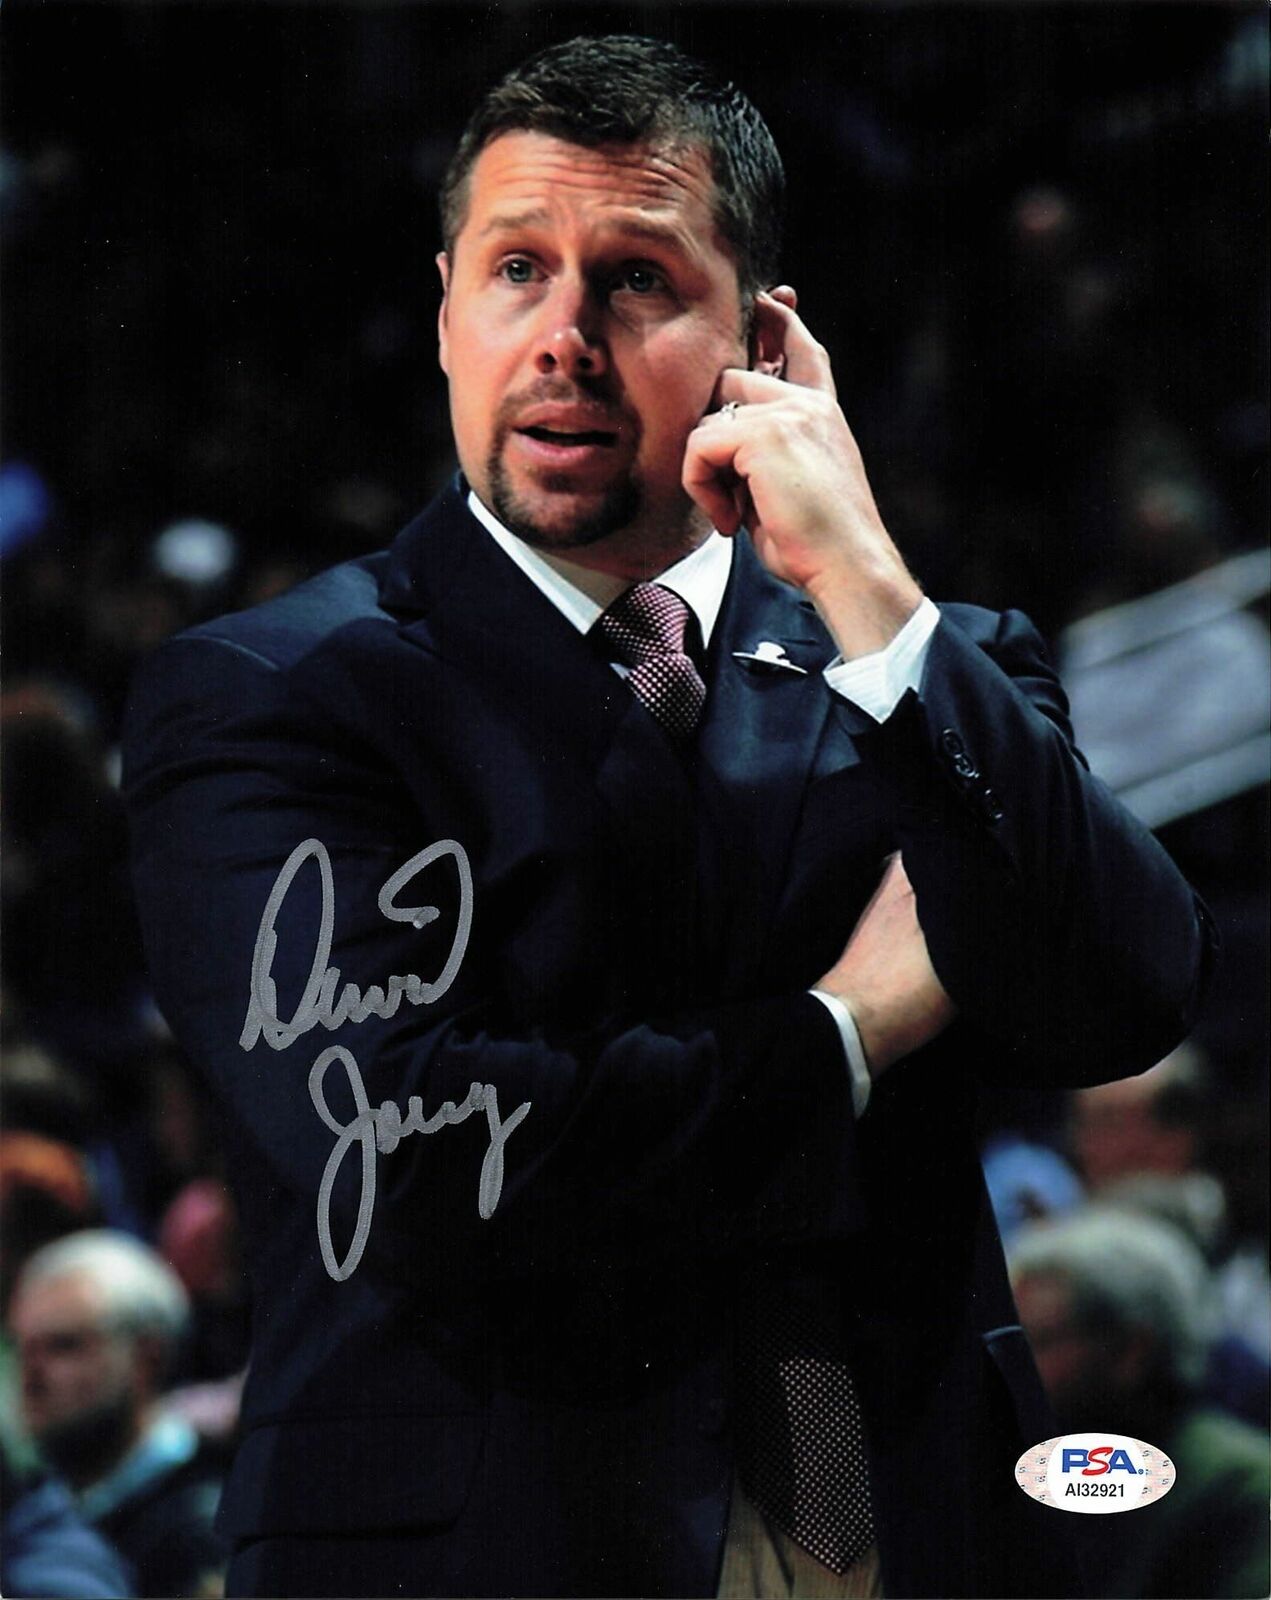 Dave Joerger Signed 8x10 Photo Poster painting PSA/DNA Philadelphia 76ers Autographed